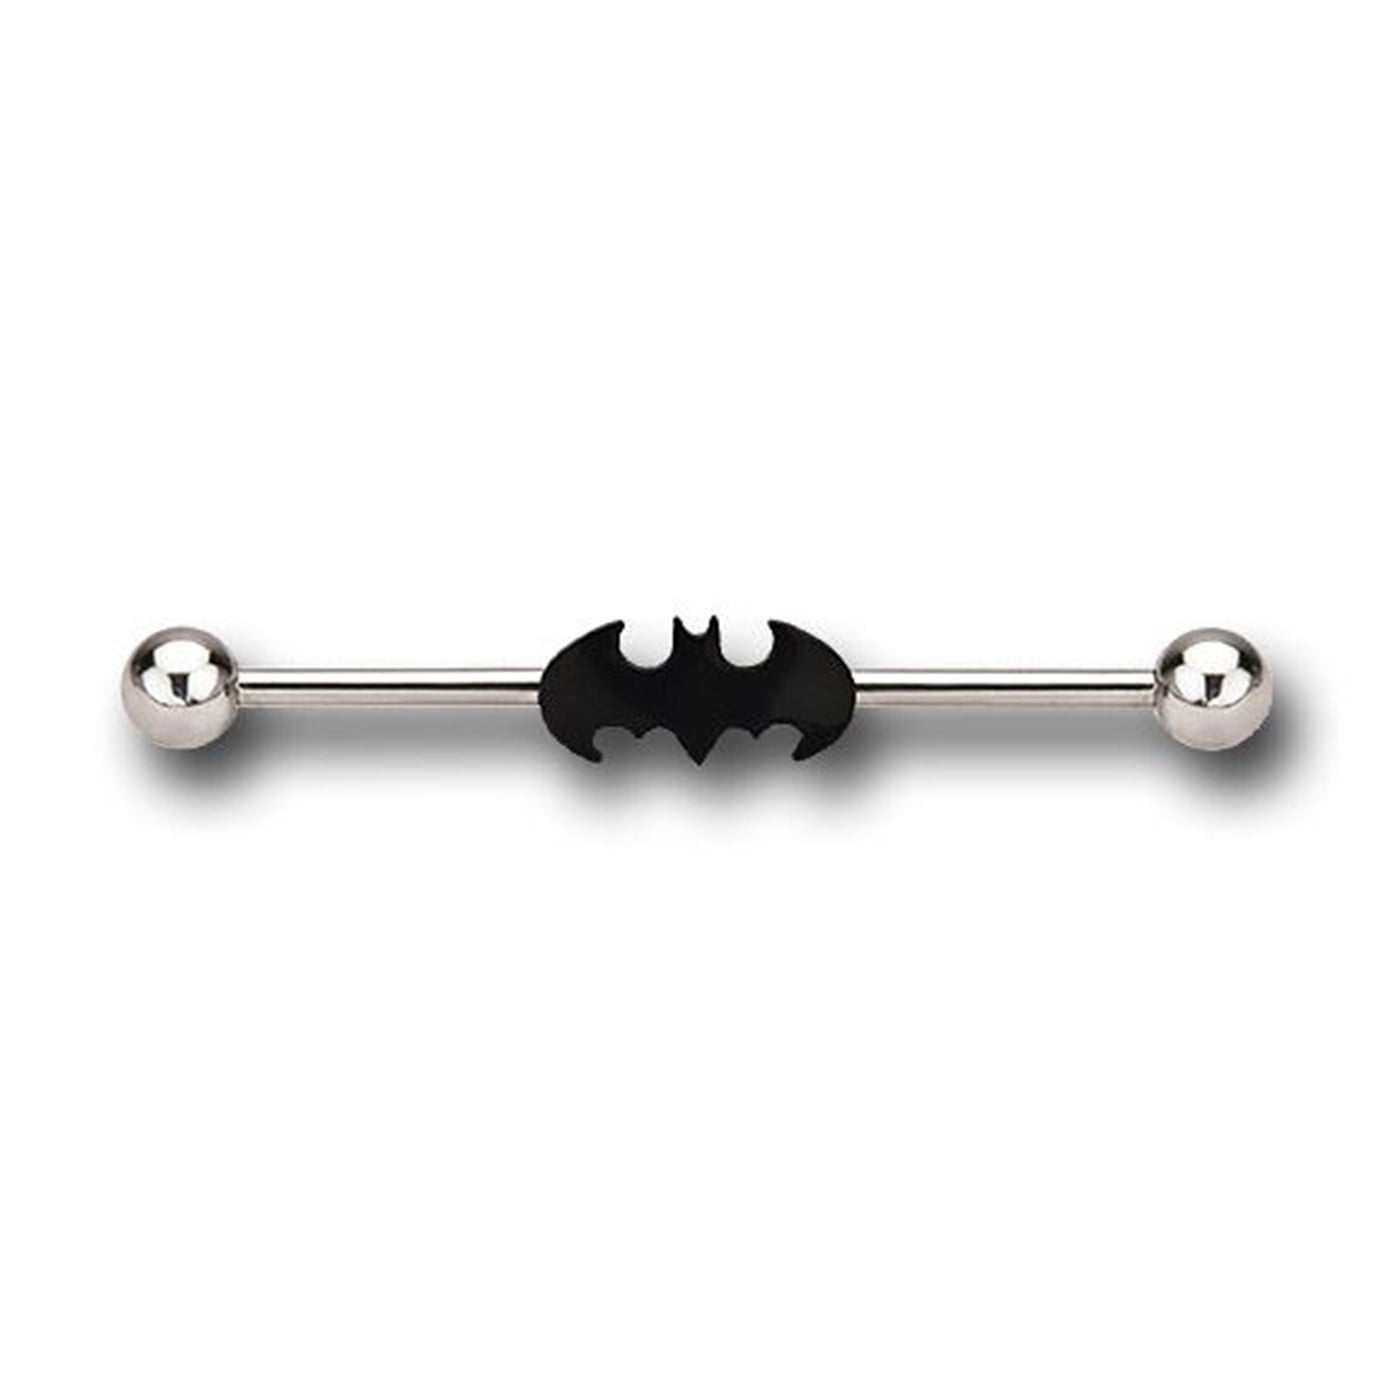 3mm,4mm,5mm 3 Pairs of 316L Stainless Steel Black IP Hollow Ball End Earrings